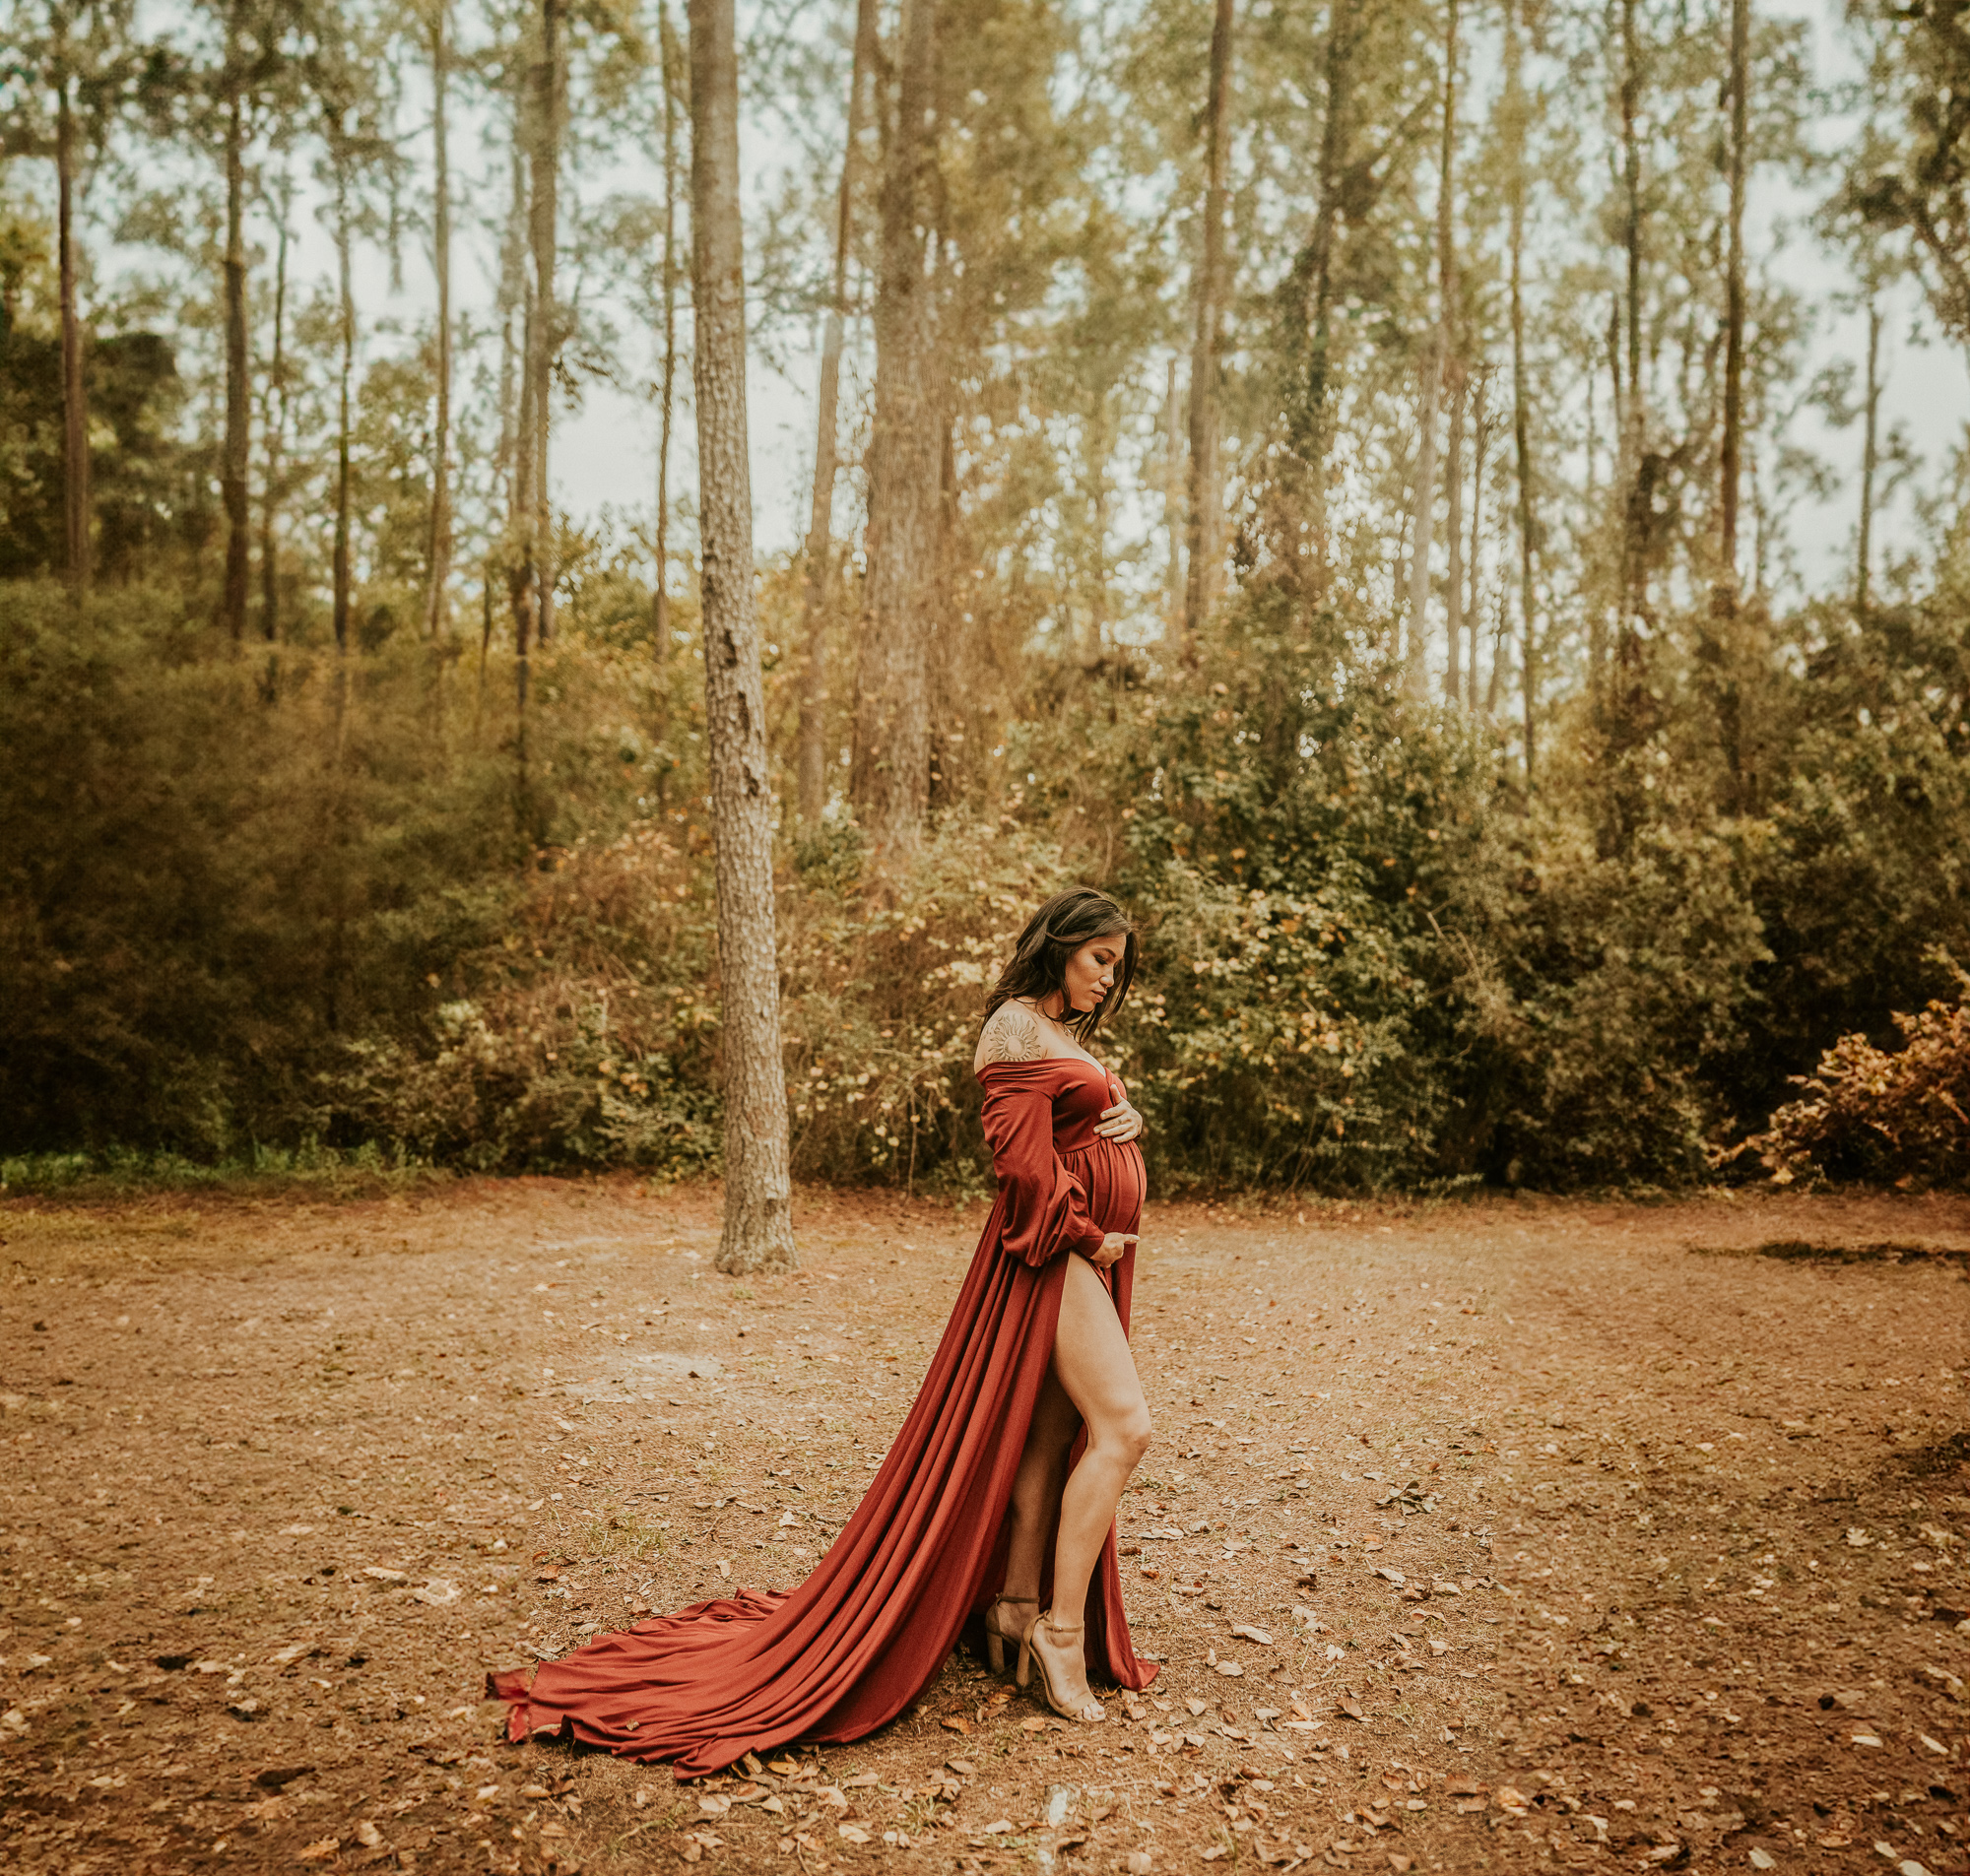 Pregnant woman posing in a forest with a flowing maroon dress in Houston, Texas. Photography taken by Helena Photographs